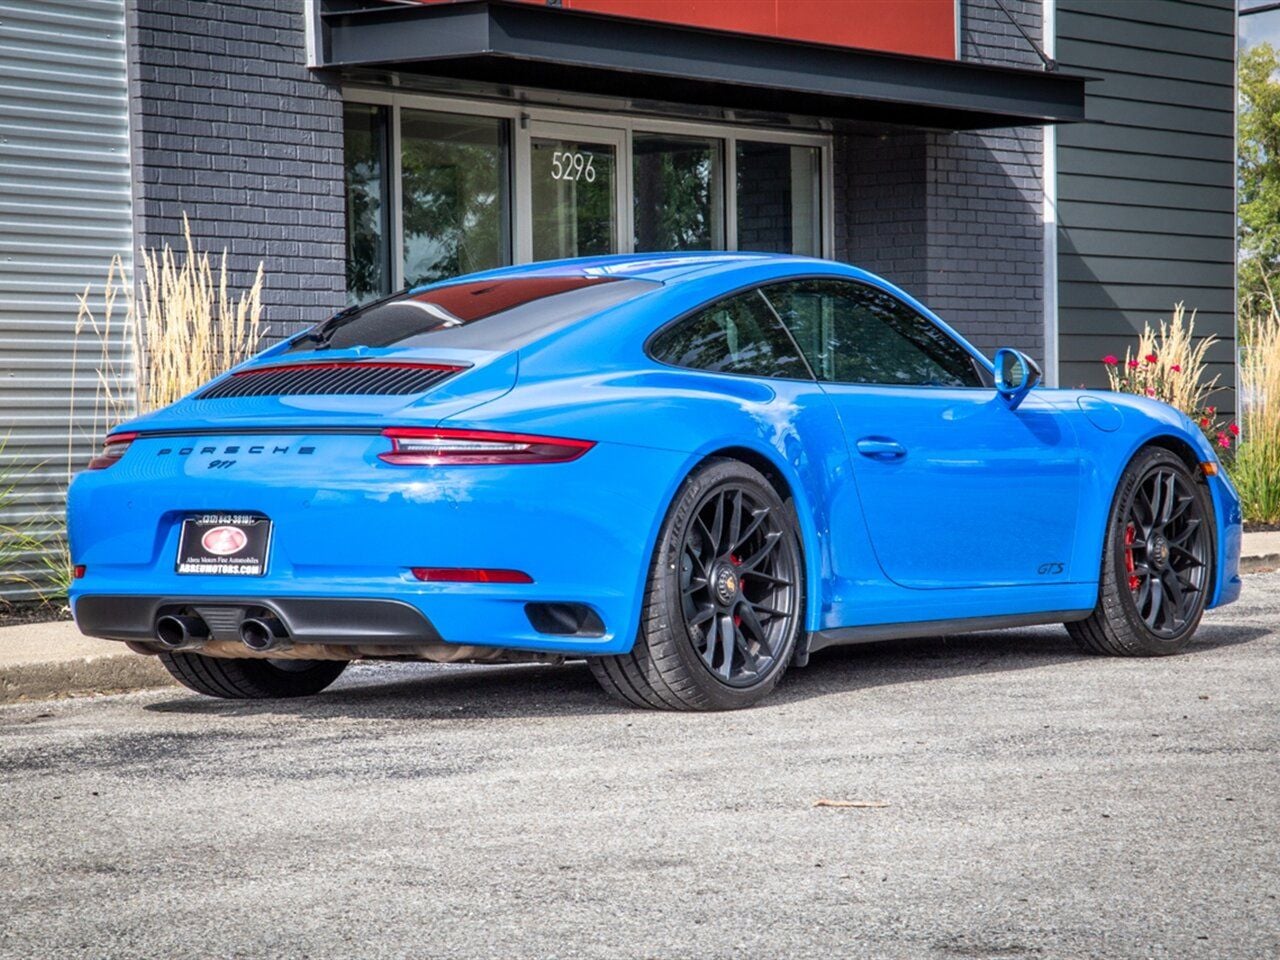 2018 Porsche 911 - 2018 991.2 GTS - PTS Voodoo Blue - CPO, One of a kind Spec - Used - VIN WP0AB2A93JS123515 - 9,500 Miles - 6 cyl - 2WD - Automatic - Coupe - Blue - Hermosa Beach, CA 90254, United States